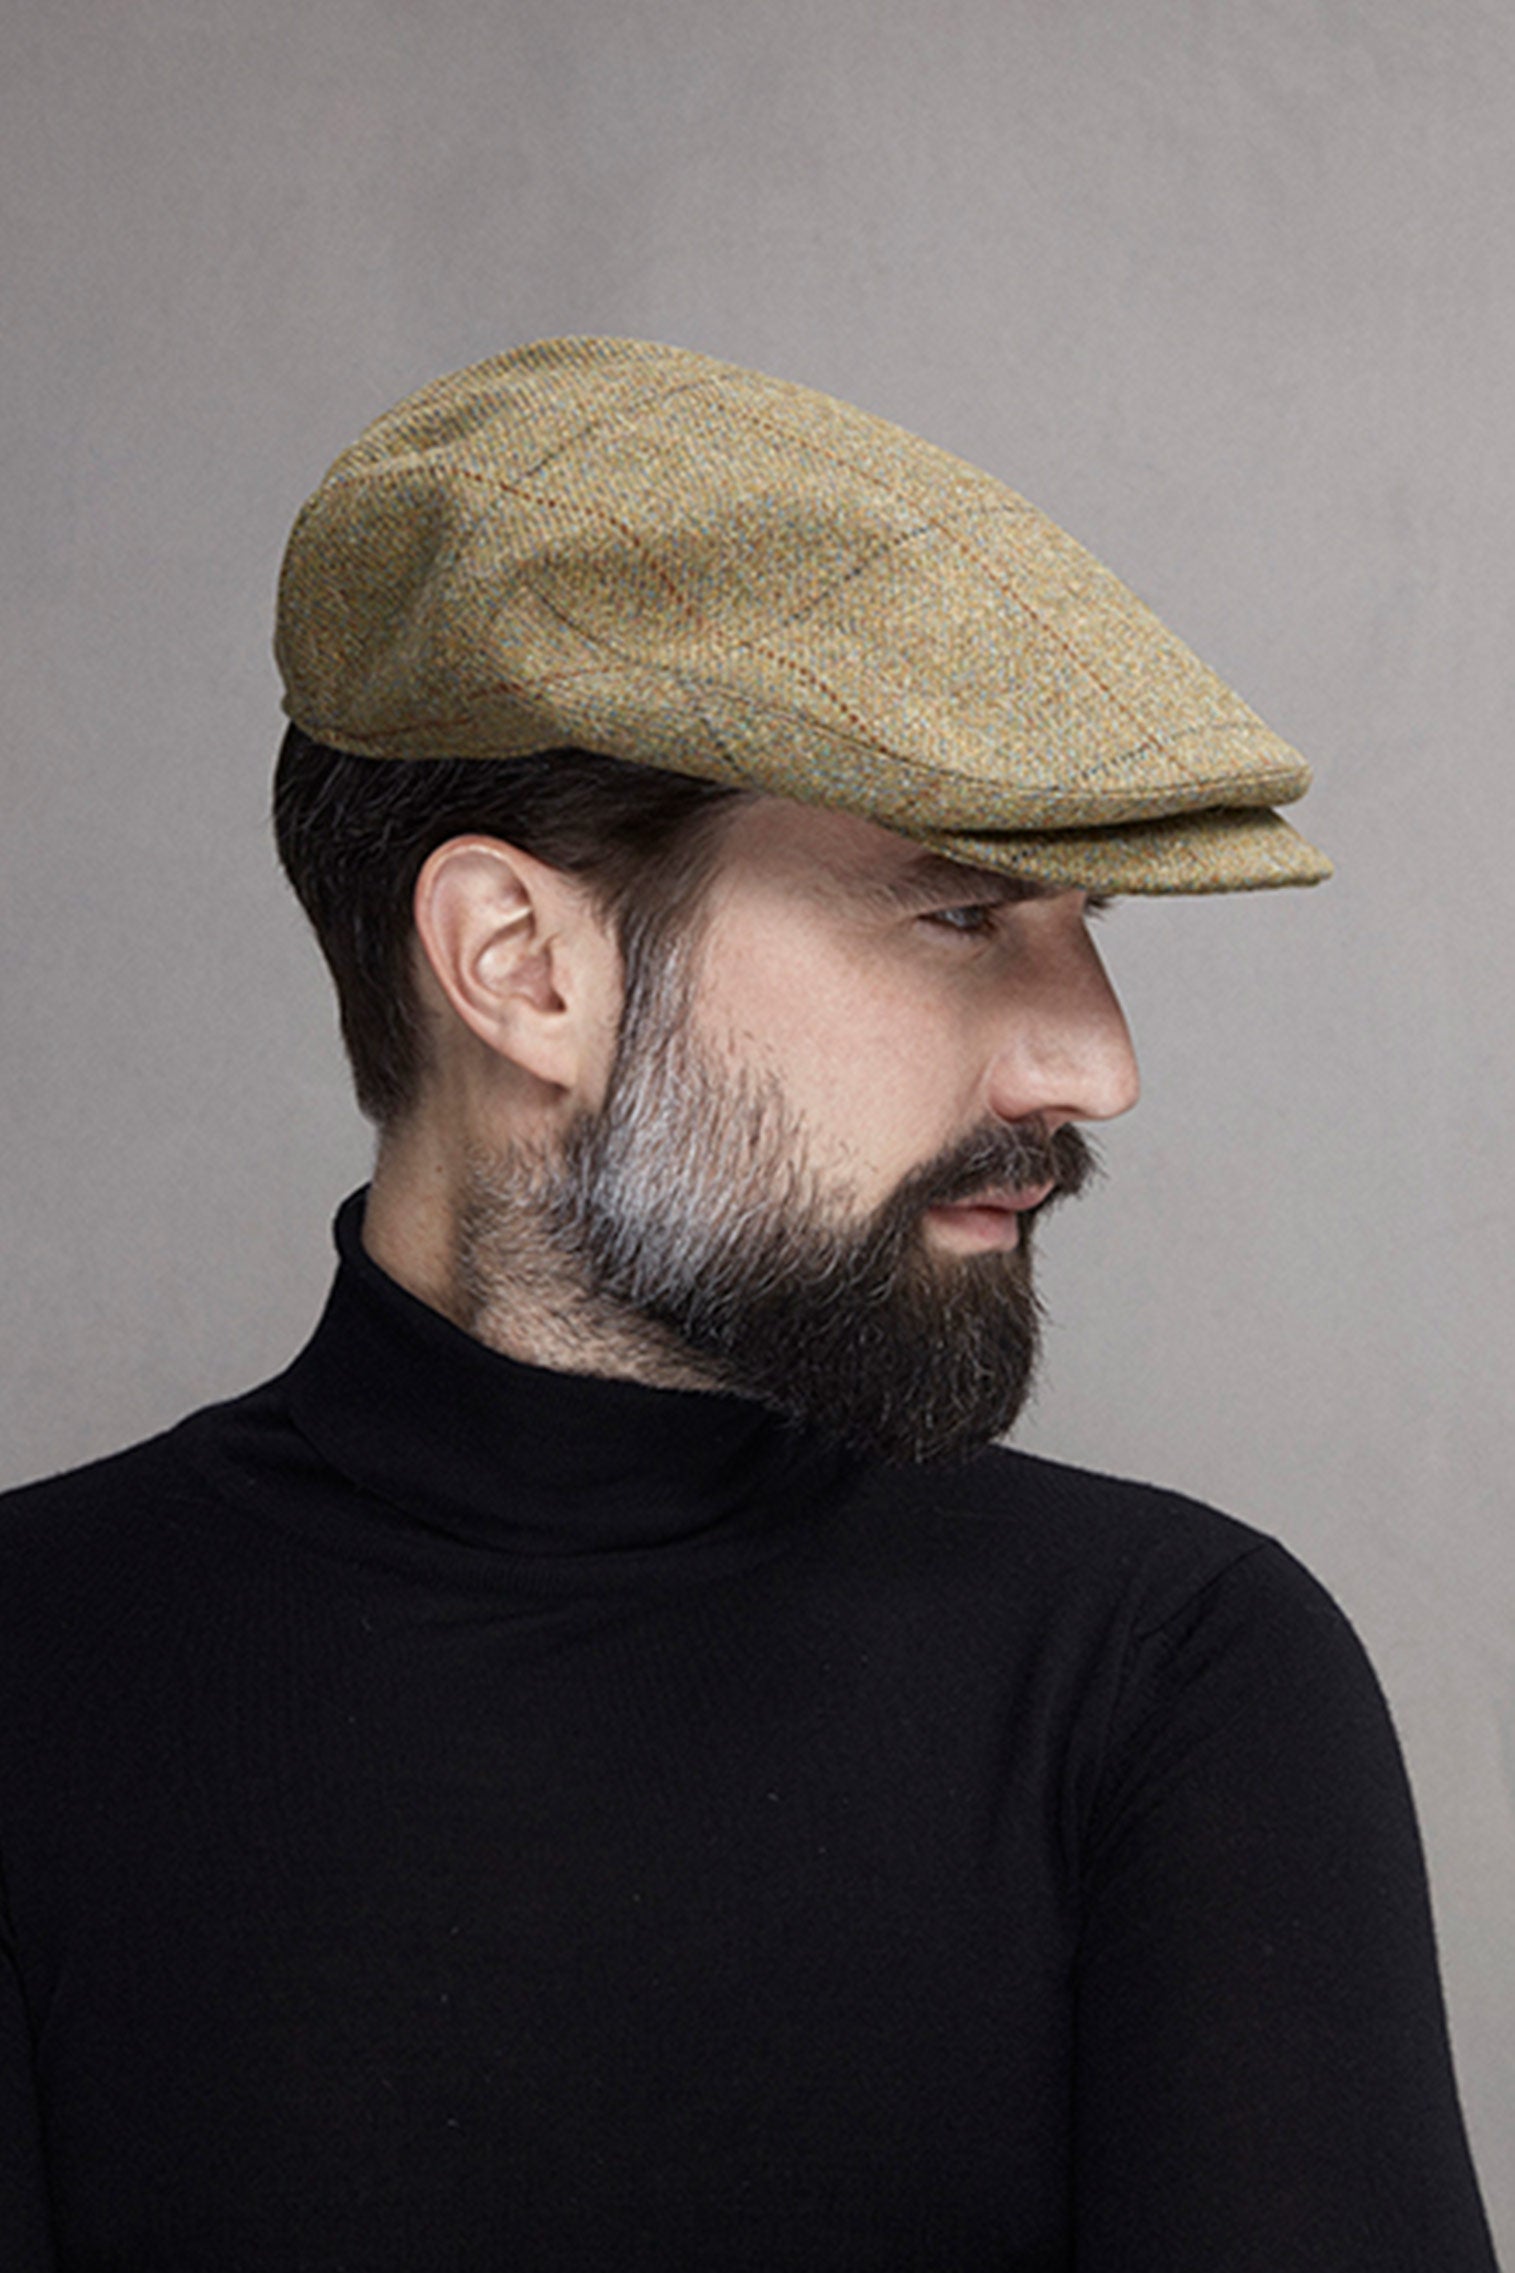 Turnberry Tweed Flat Cap - Hats for Tall People - Lock & Co. Hatters London UK